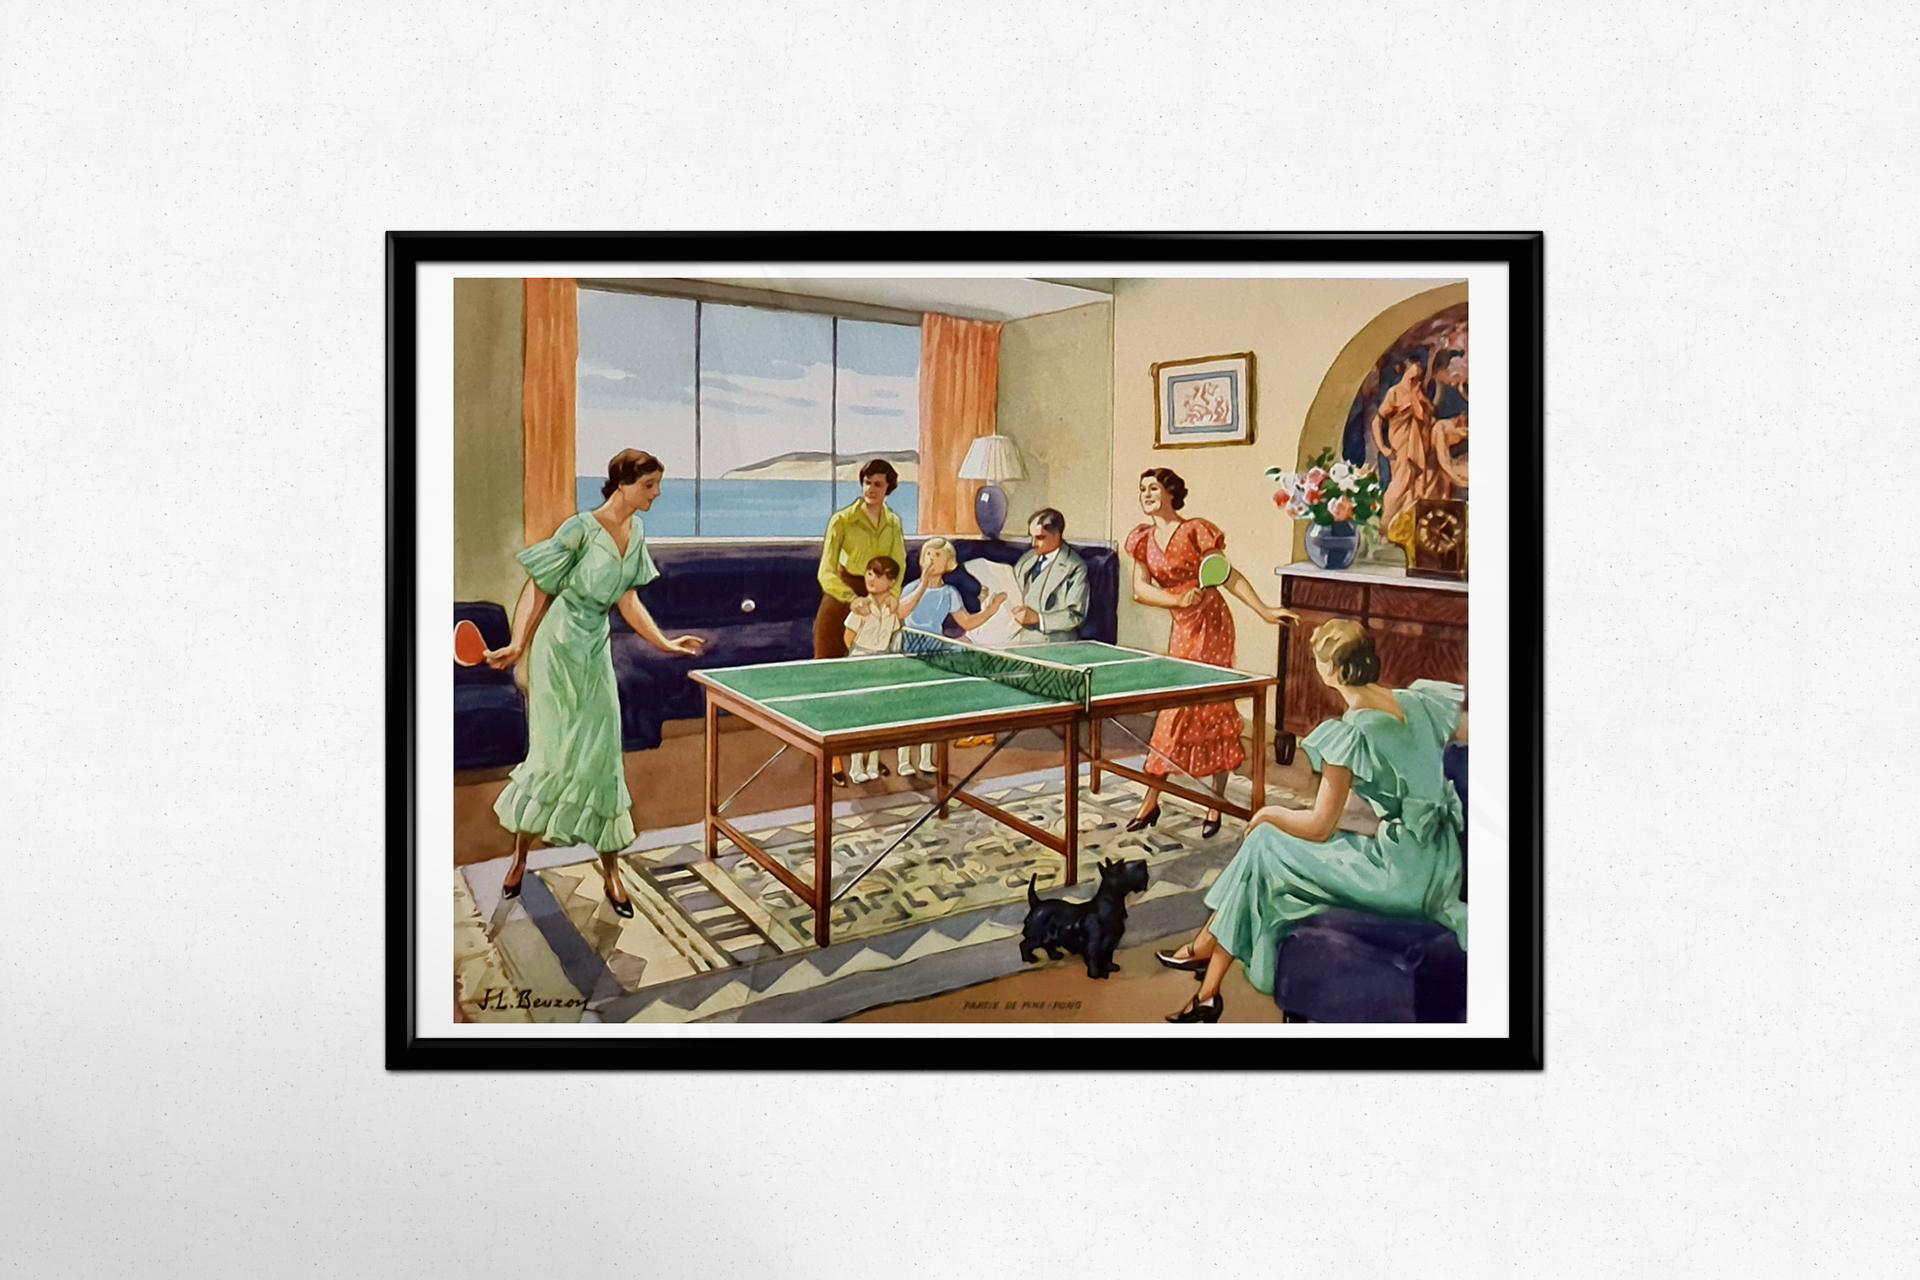 An attractive poster by J.L Beuzon, showing a game of ping-pong in the mid-1930s. The ladies are elegantly dressed for a game of table tennis.

Table tennis is thought to have originated in England at the end of the 19th century.

The most common